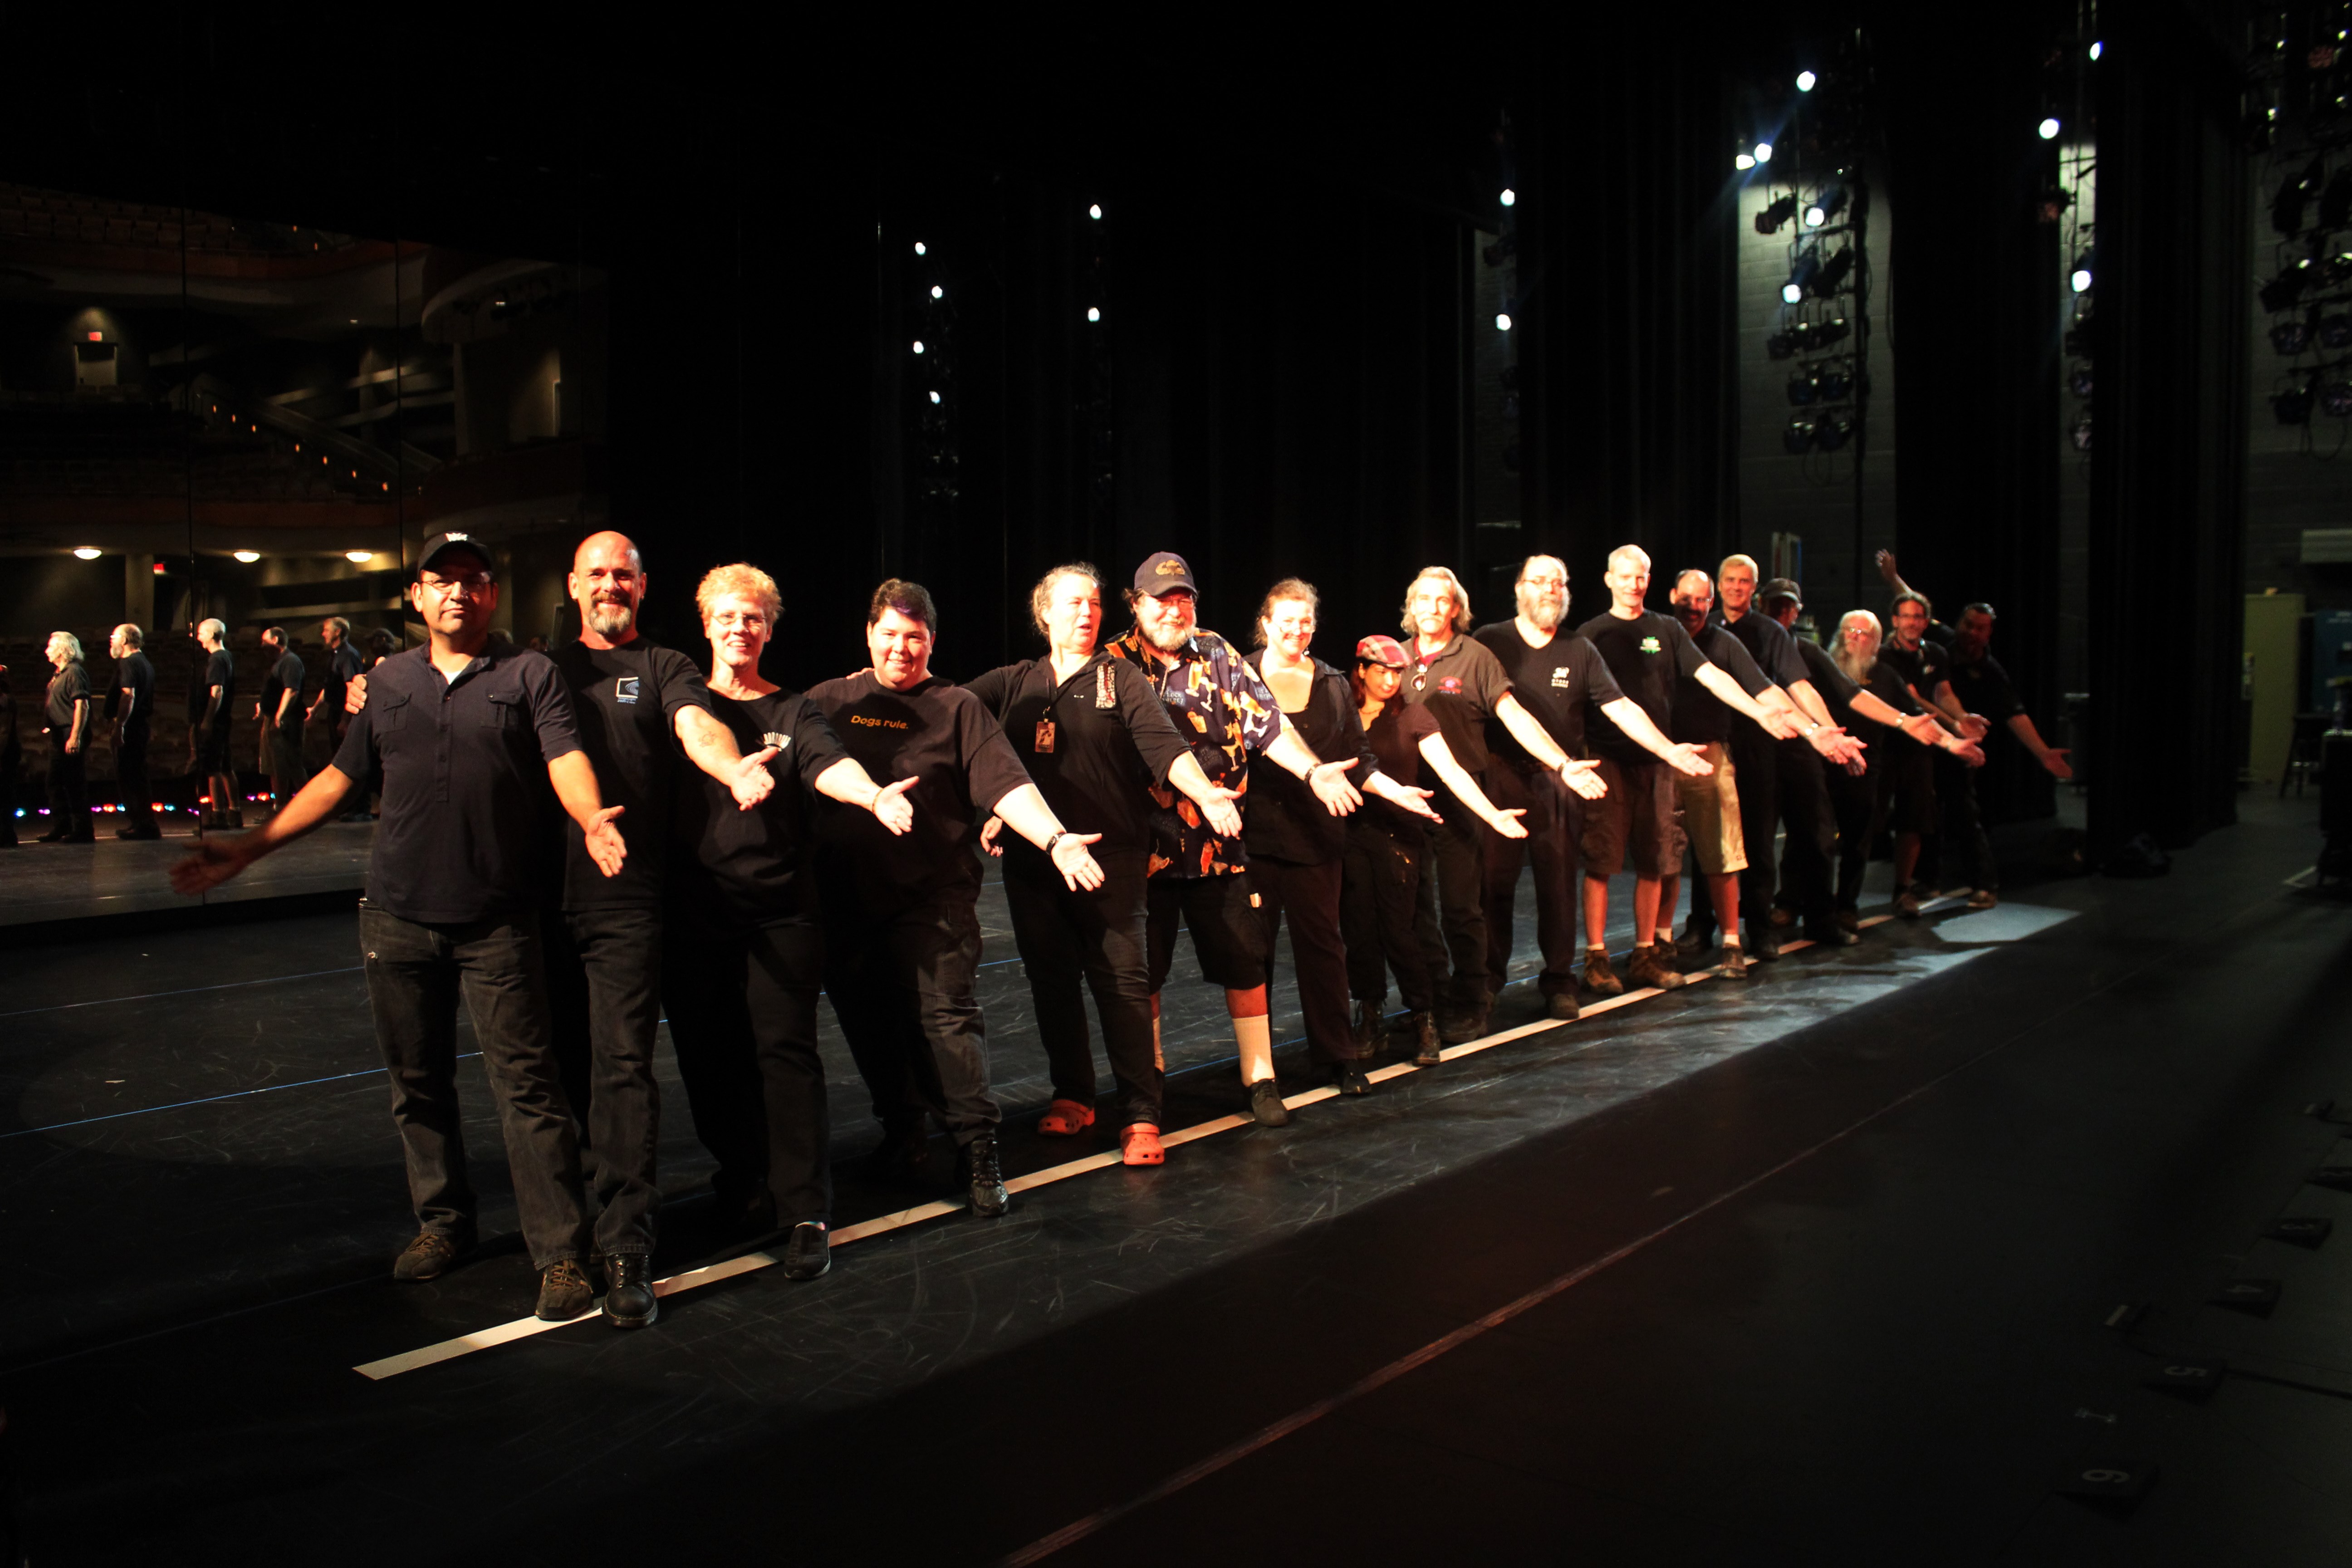 Crew photo from A Chorus Line, September 2013. Photo from Frank Cortez